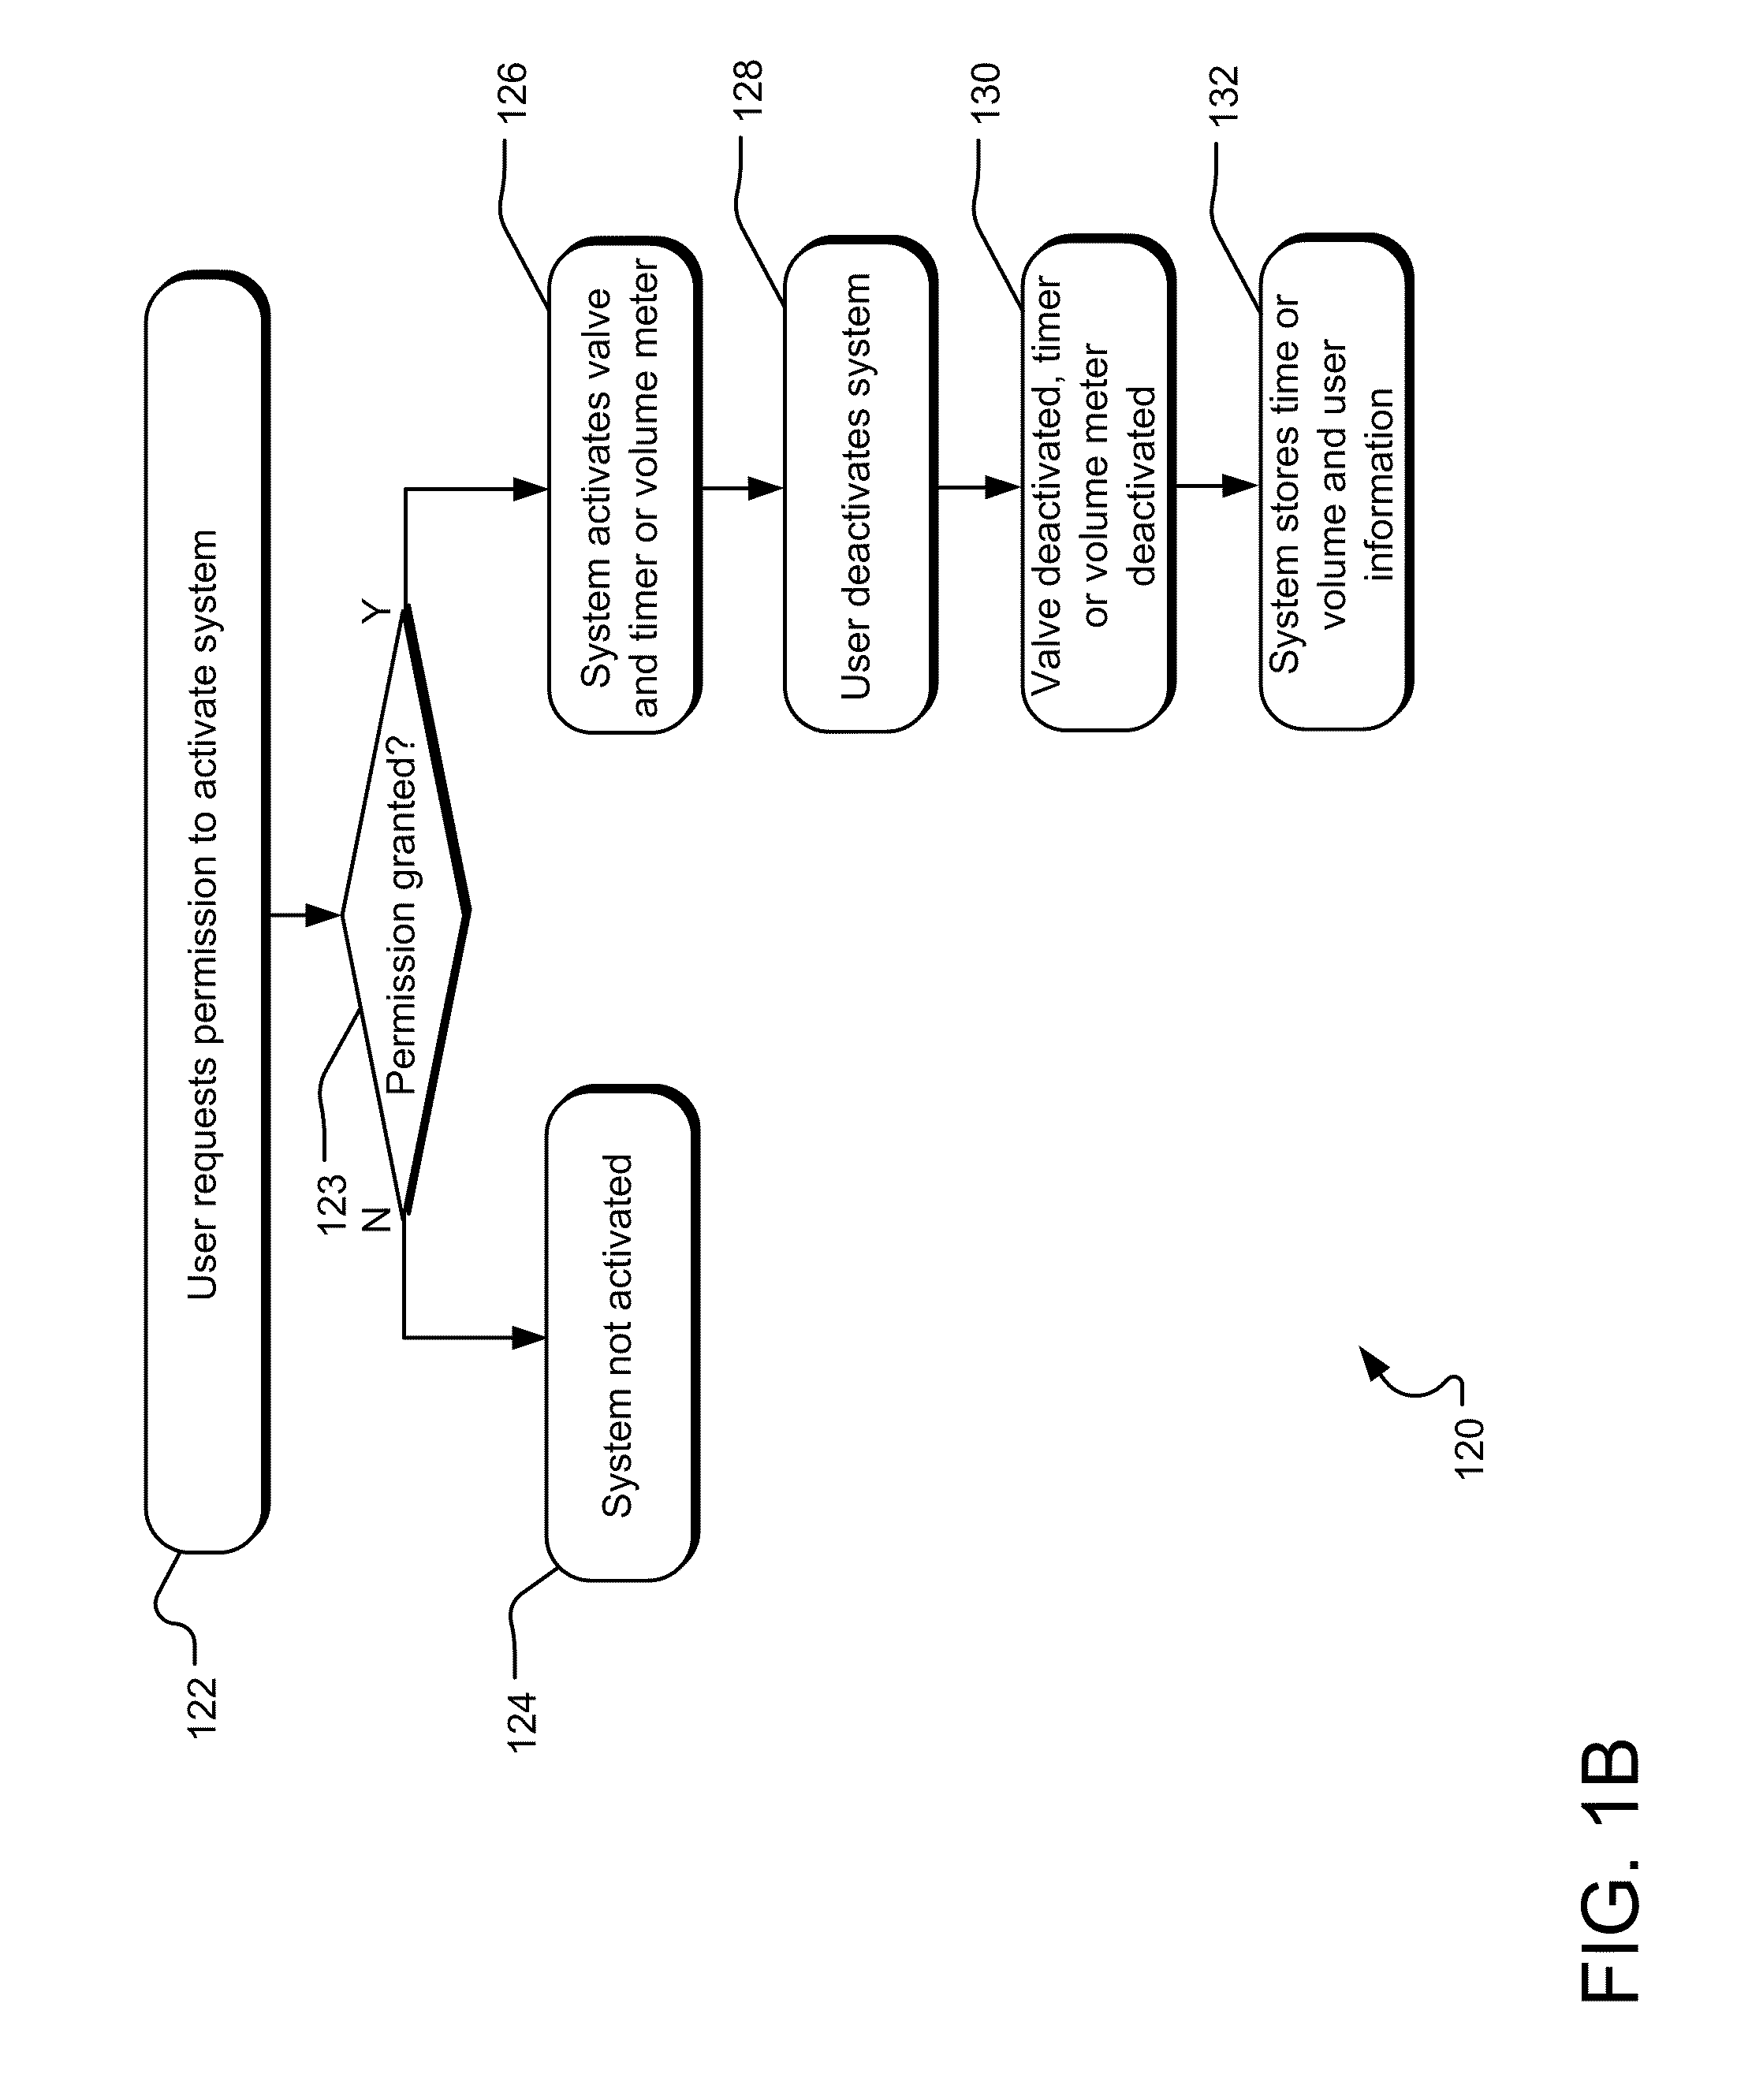 Electronically-controlled water dispensing system